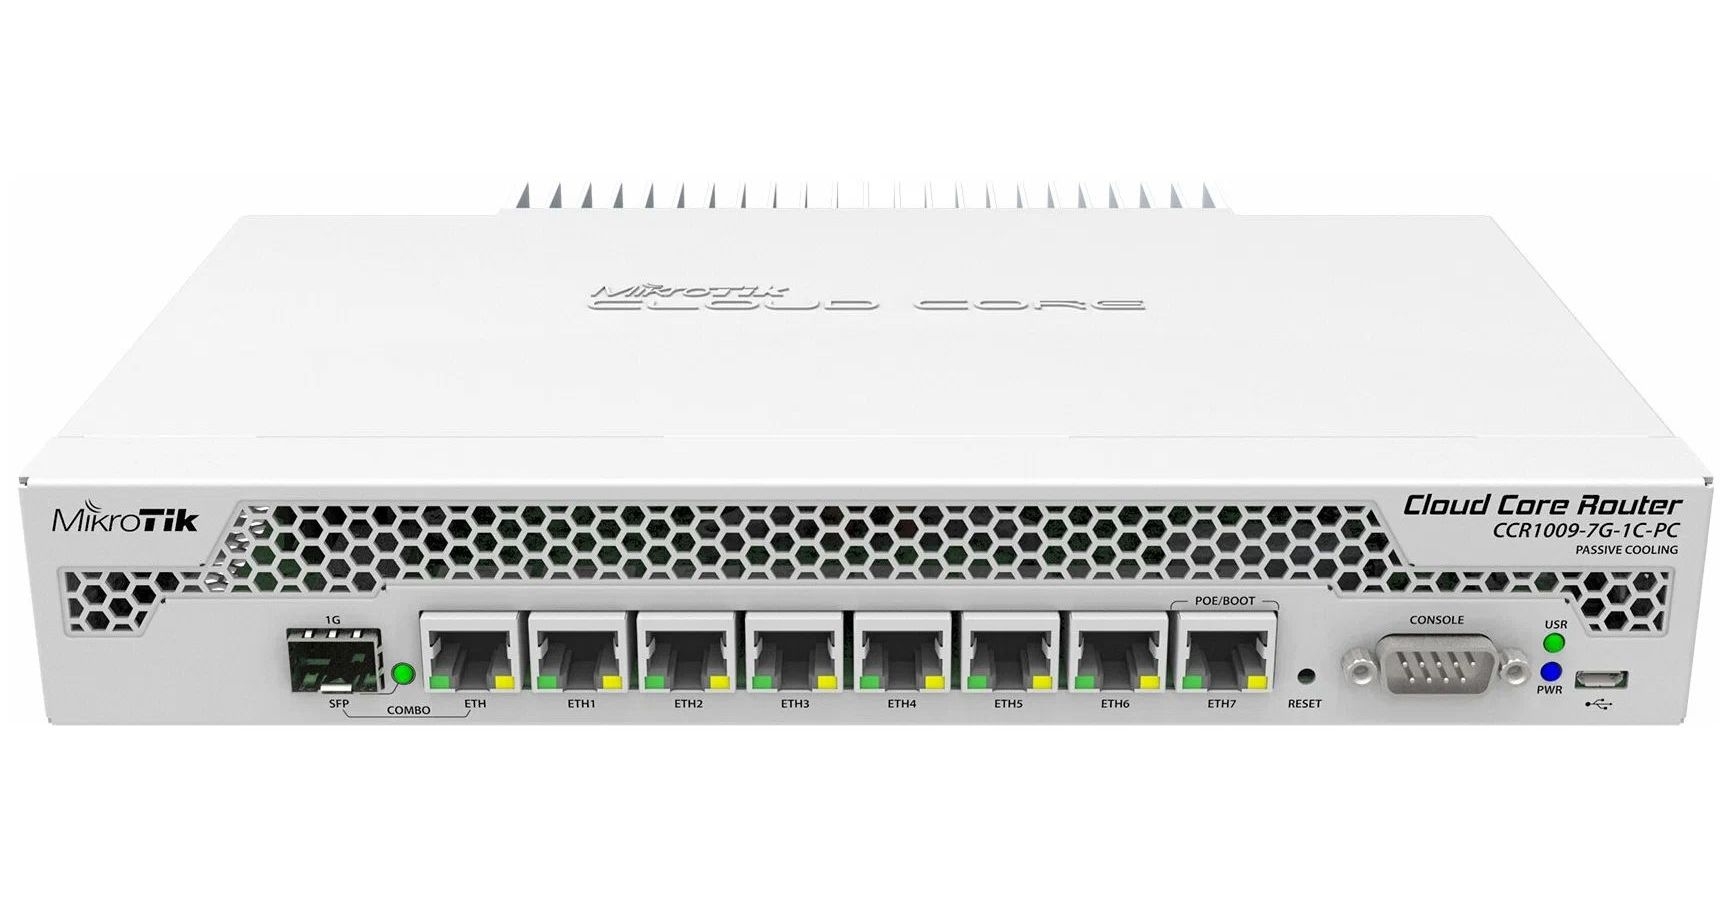 Маршрутизатор MikroTik CCR1009-7G-1C-PC маршрутизатор mikrotik cloud core router ccr1009 7g 1c 1s pc